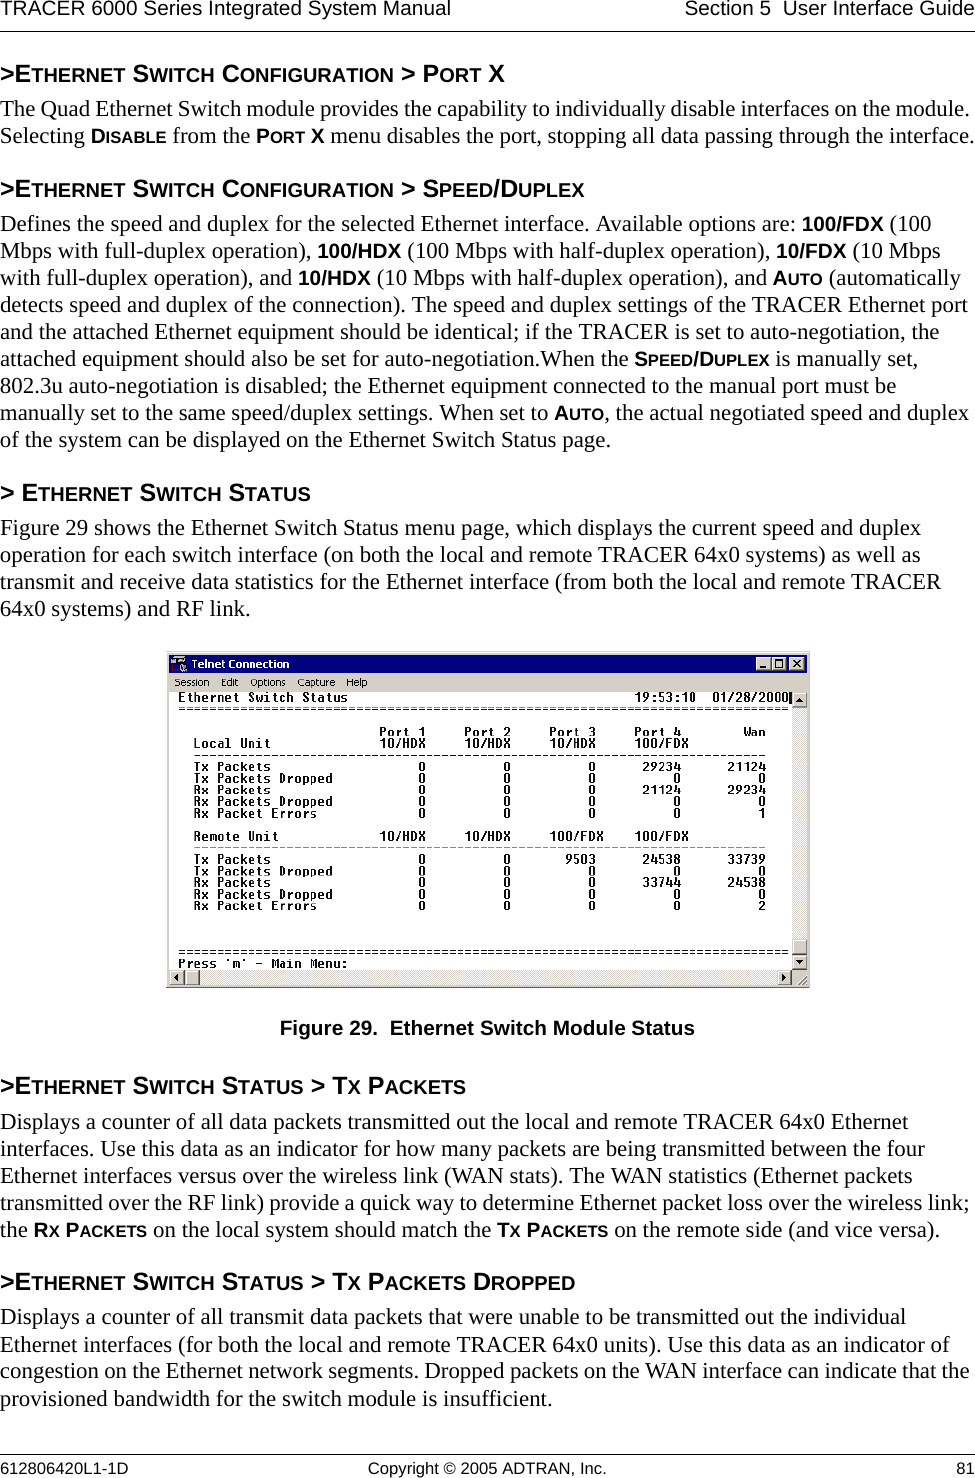 TRACER 6000 Series Integrated System Manual Section 5  User Interface Guide612806420L1-1D Copyright © 2005 ADTRAN, Inc. 81&gt;ETHERNET SWITCH CONFIGURATION &gt; PORT XThe Quad Ethernet Switch module provides the capability to individually disable interfaces on the module. Selecting DISABLE from the PORT X menu disables the port, stopping all data passing through the interface.&gt;ETHERNET SWITCH CONFIGURATION &gt; SPEED/DUPLEXDefines the speed and duplex for the selected Ethernet interface. Available options are: 100/FDX (100 Mbps with full-duplex operation), 100/HDX (100 Mbps with half-duplex operation), 10/FDX (10 Mbps with full-duplex operation), and 10/HDX (10 Mbps with half-duplex operation), and AUTO (automatically detects speed and duplex of the connection). The speed and duplex settings of the TRACER Ethernet port and the attached Ethernet equipment should be identical; if the TRACER is set to auto-negotiation, the attached equipment should also be set for auto-negotiation.When the SPEED/DUPLEX is manually set, 802.3u auto-negotiation is disabled; the Ethernet equipment connected to the manual port must be manually set to the same speed/duplex settings. When set to AUTO, the actual negotiated speed and duplex of the system can be displayed on the Ethernet Switch Status page.&gt; ETHERNET SWITCH STATUSFigure 29 shows the Ethernet Switch Status menu page, which displays the current speed and duplex operation for each switch interface (on both the local and remote TRACER 64x0 systems) as well as transmit and receive data statistics for the Ethernet interface (from both the local and remote TRACER 64x0 systems) and RF link.Figure 29.  Ethernet Switch Module Status&gt;ETHERNET SWITCH STATUS &gt; TX PACKETSDisplays a counter of all data packets transmitted out the local and remote TRACER 64x0 Ethernet interfaces. Use this data as an indicator for how many packets are being transmitted between the four Ethernet interfaces versus over the wireless link (WAN stats). The WAN statistics (Ethernet packets transmitted over the RF link) provide a quick way to determine Ethernet packet loss over the wireless link; the RX PACKETS on the local system should match the TX PACKETS on the remote side (and vice versa).&gt;ETHERNET SWITCH STATUS &gt; TX PACKETS DROPPEDDisplays a counter of all transmit data packets that were unable to be transmitted out the individual Ethernet interfaces (for both the local and remote TRACER 64x0 units). Use this data as an indicator of congestion on the Ethernet network segments. Dropped packets on the WAN interface can indicate that the provisioned bandwidth for the switch module is insufficient.